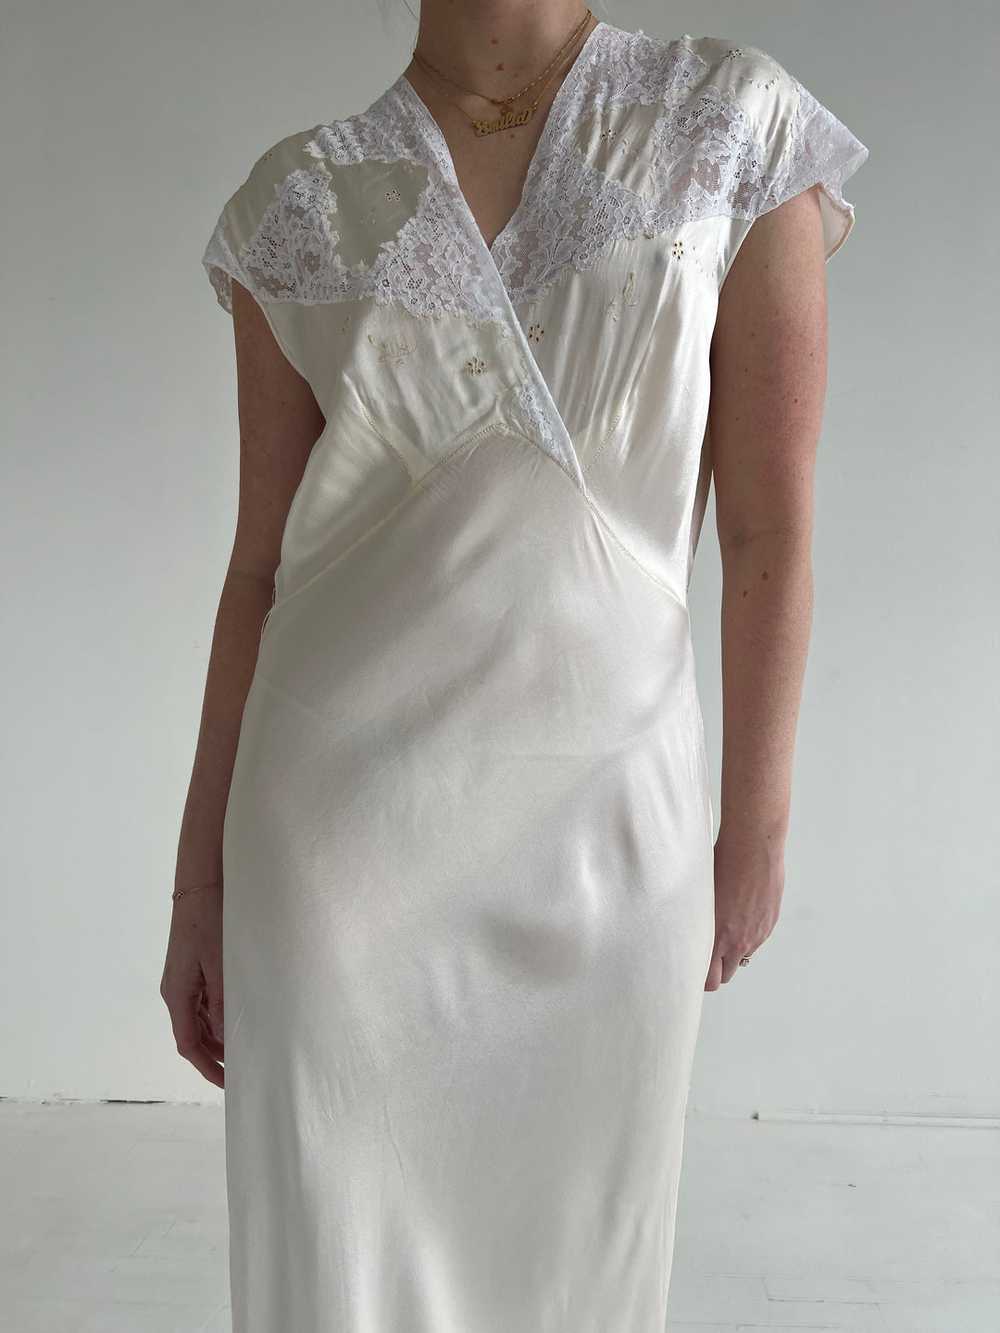 1930's Cream Satin Dress with White Lace - image 3